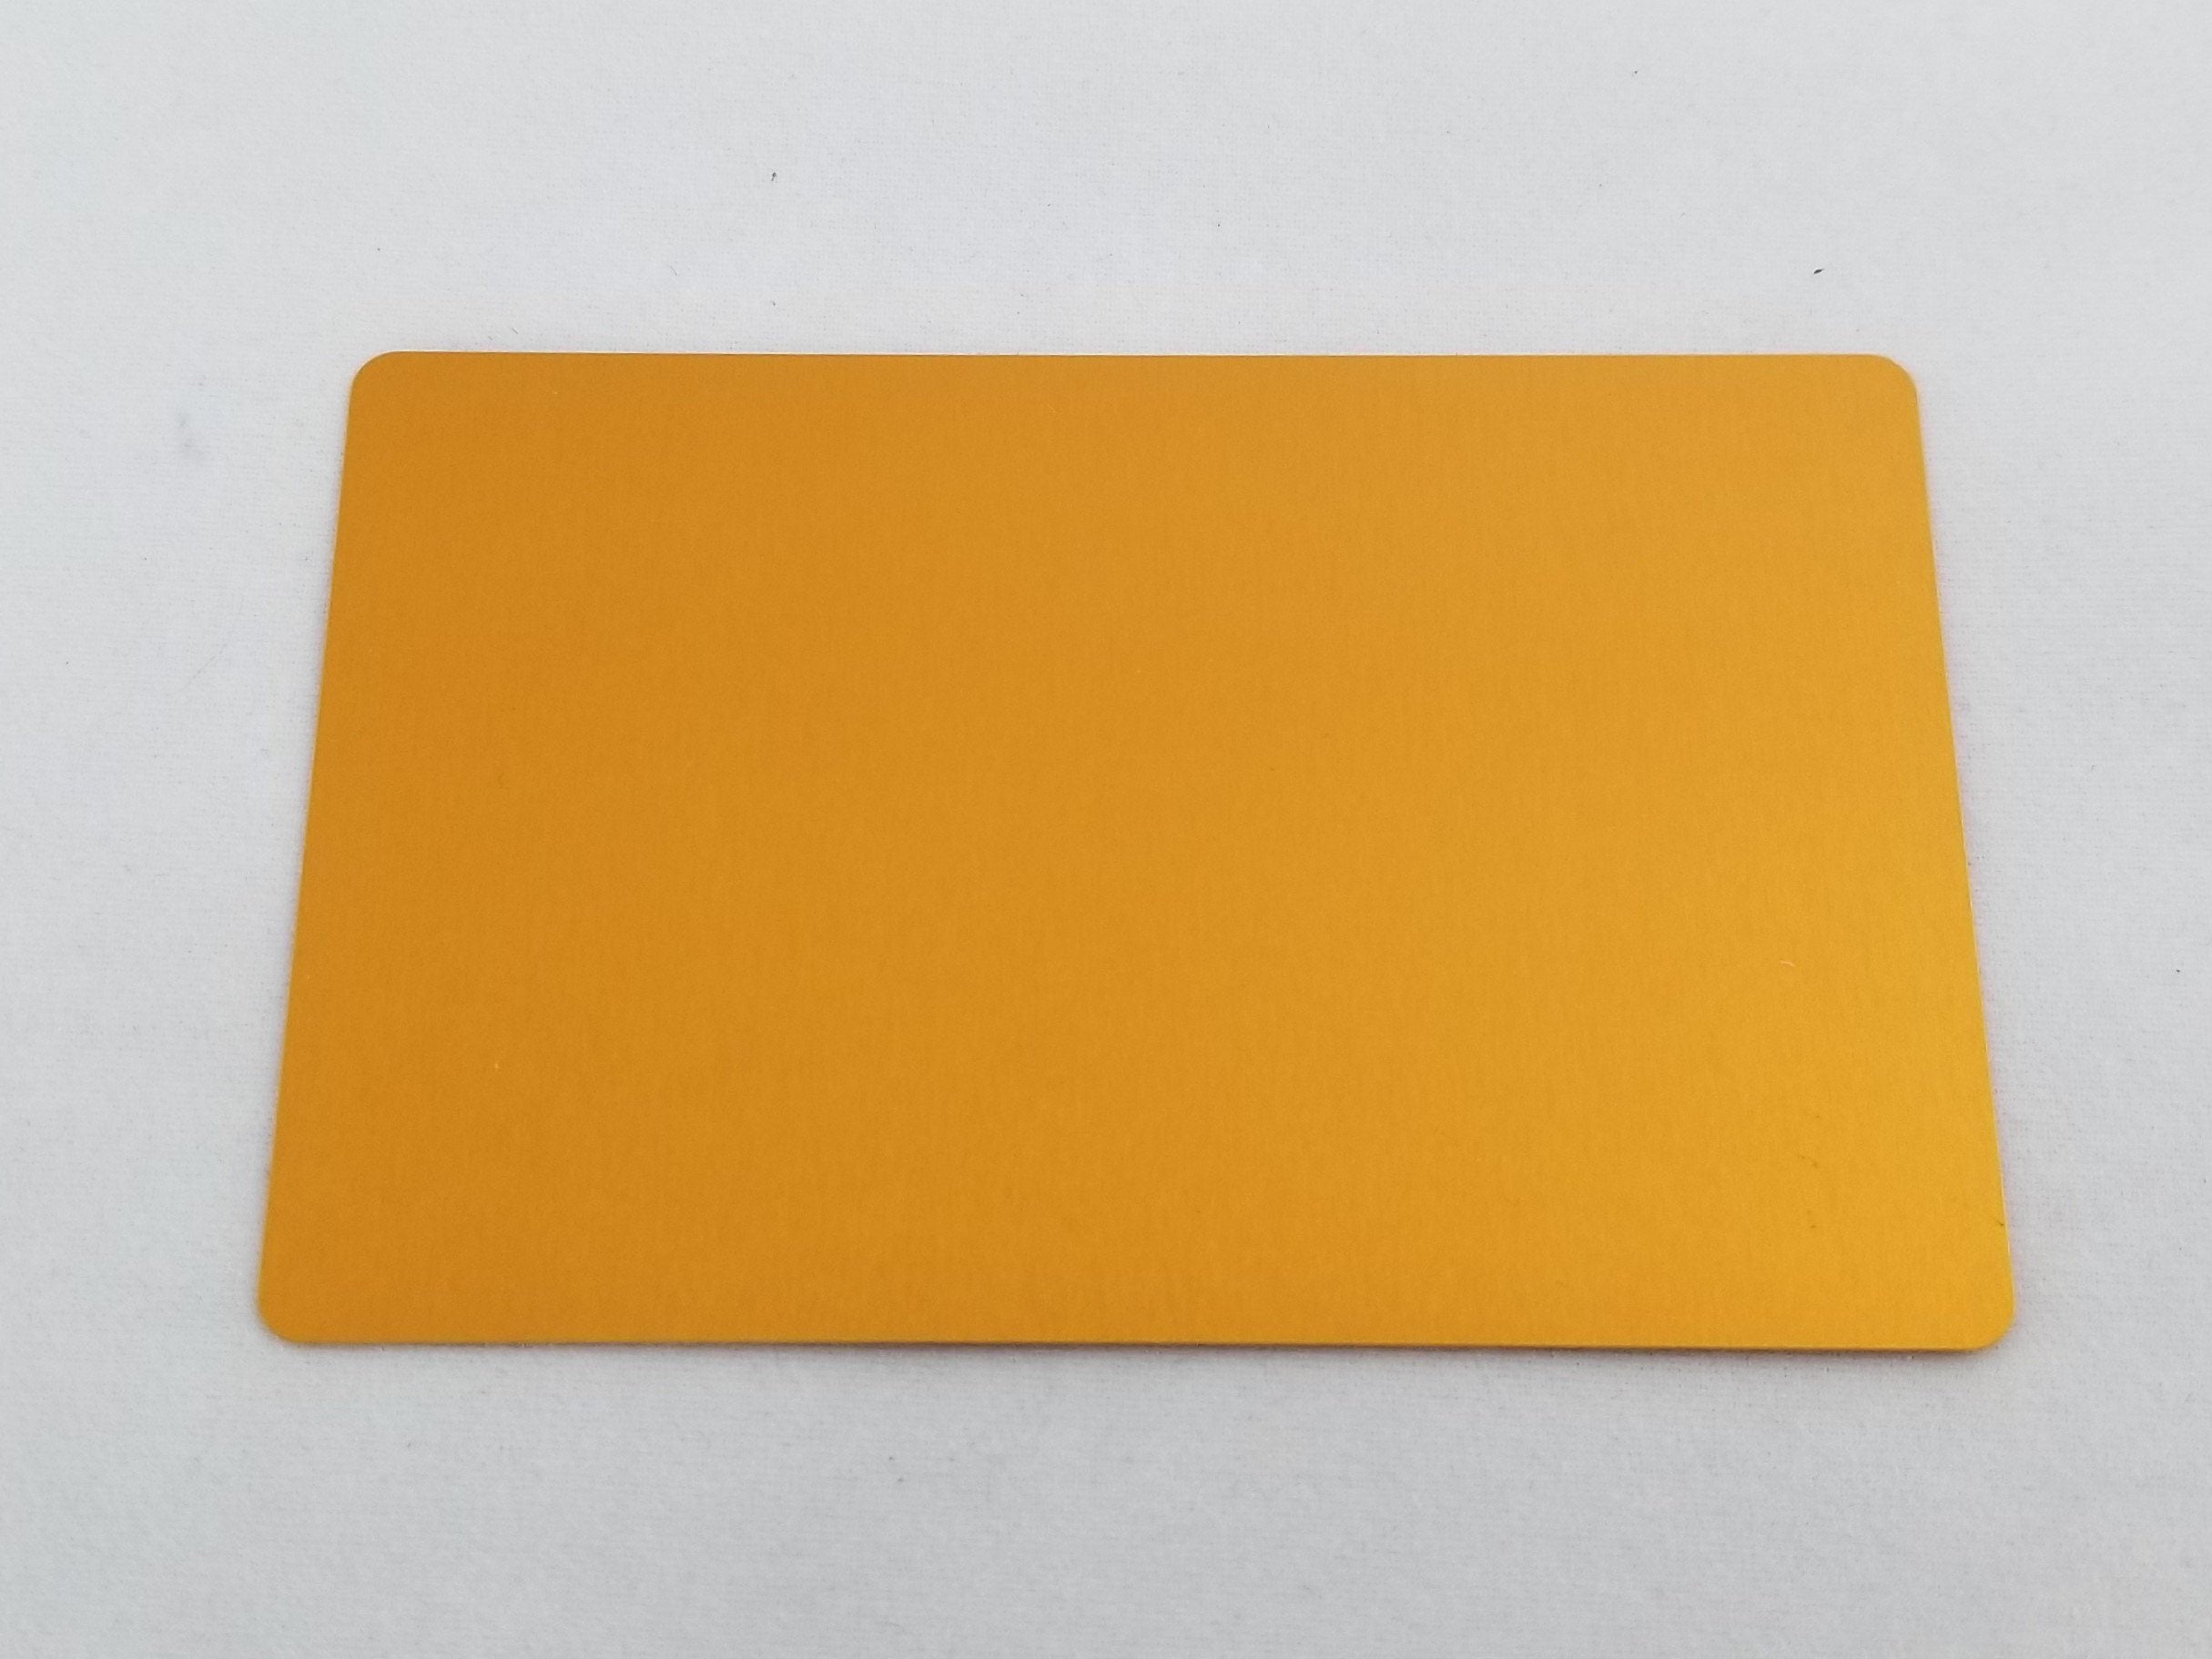 Shop for and Buy Anodized Aluminum Business Cards Blank at Keyring